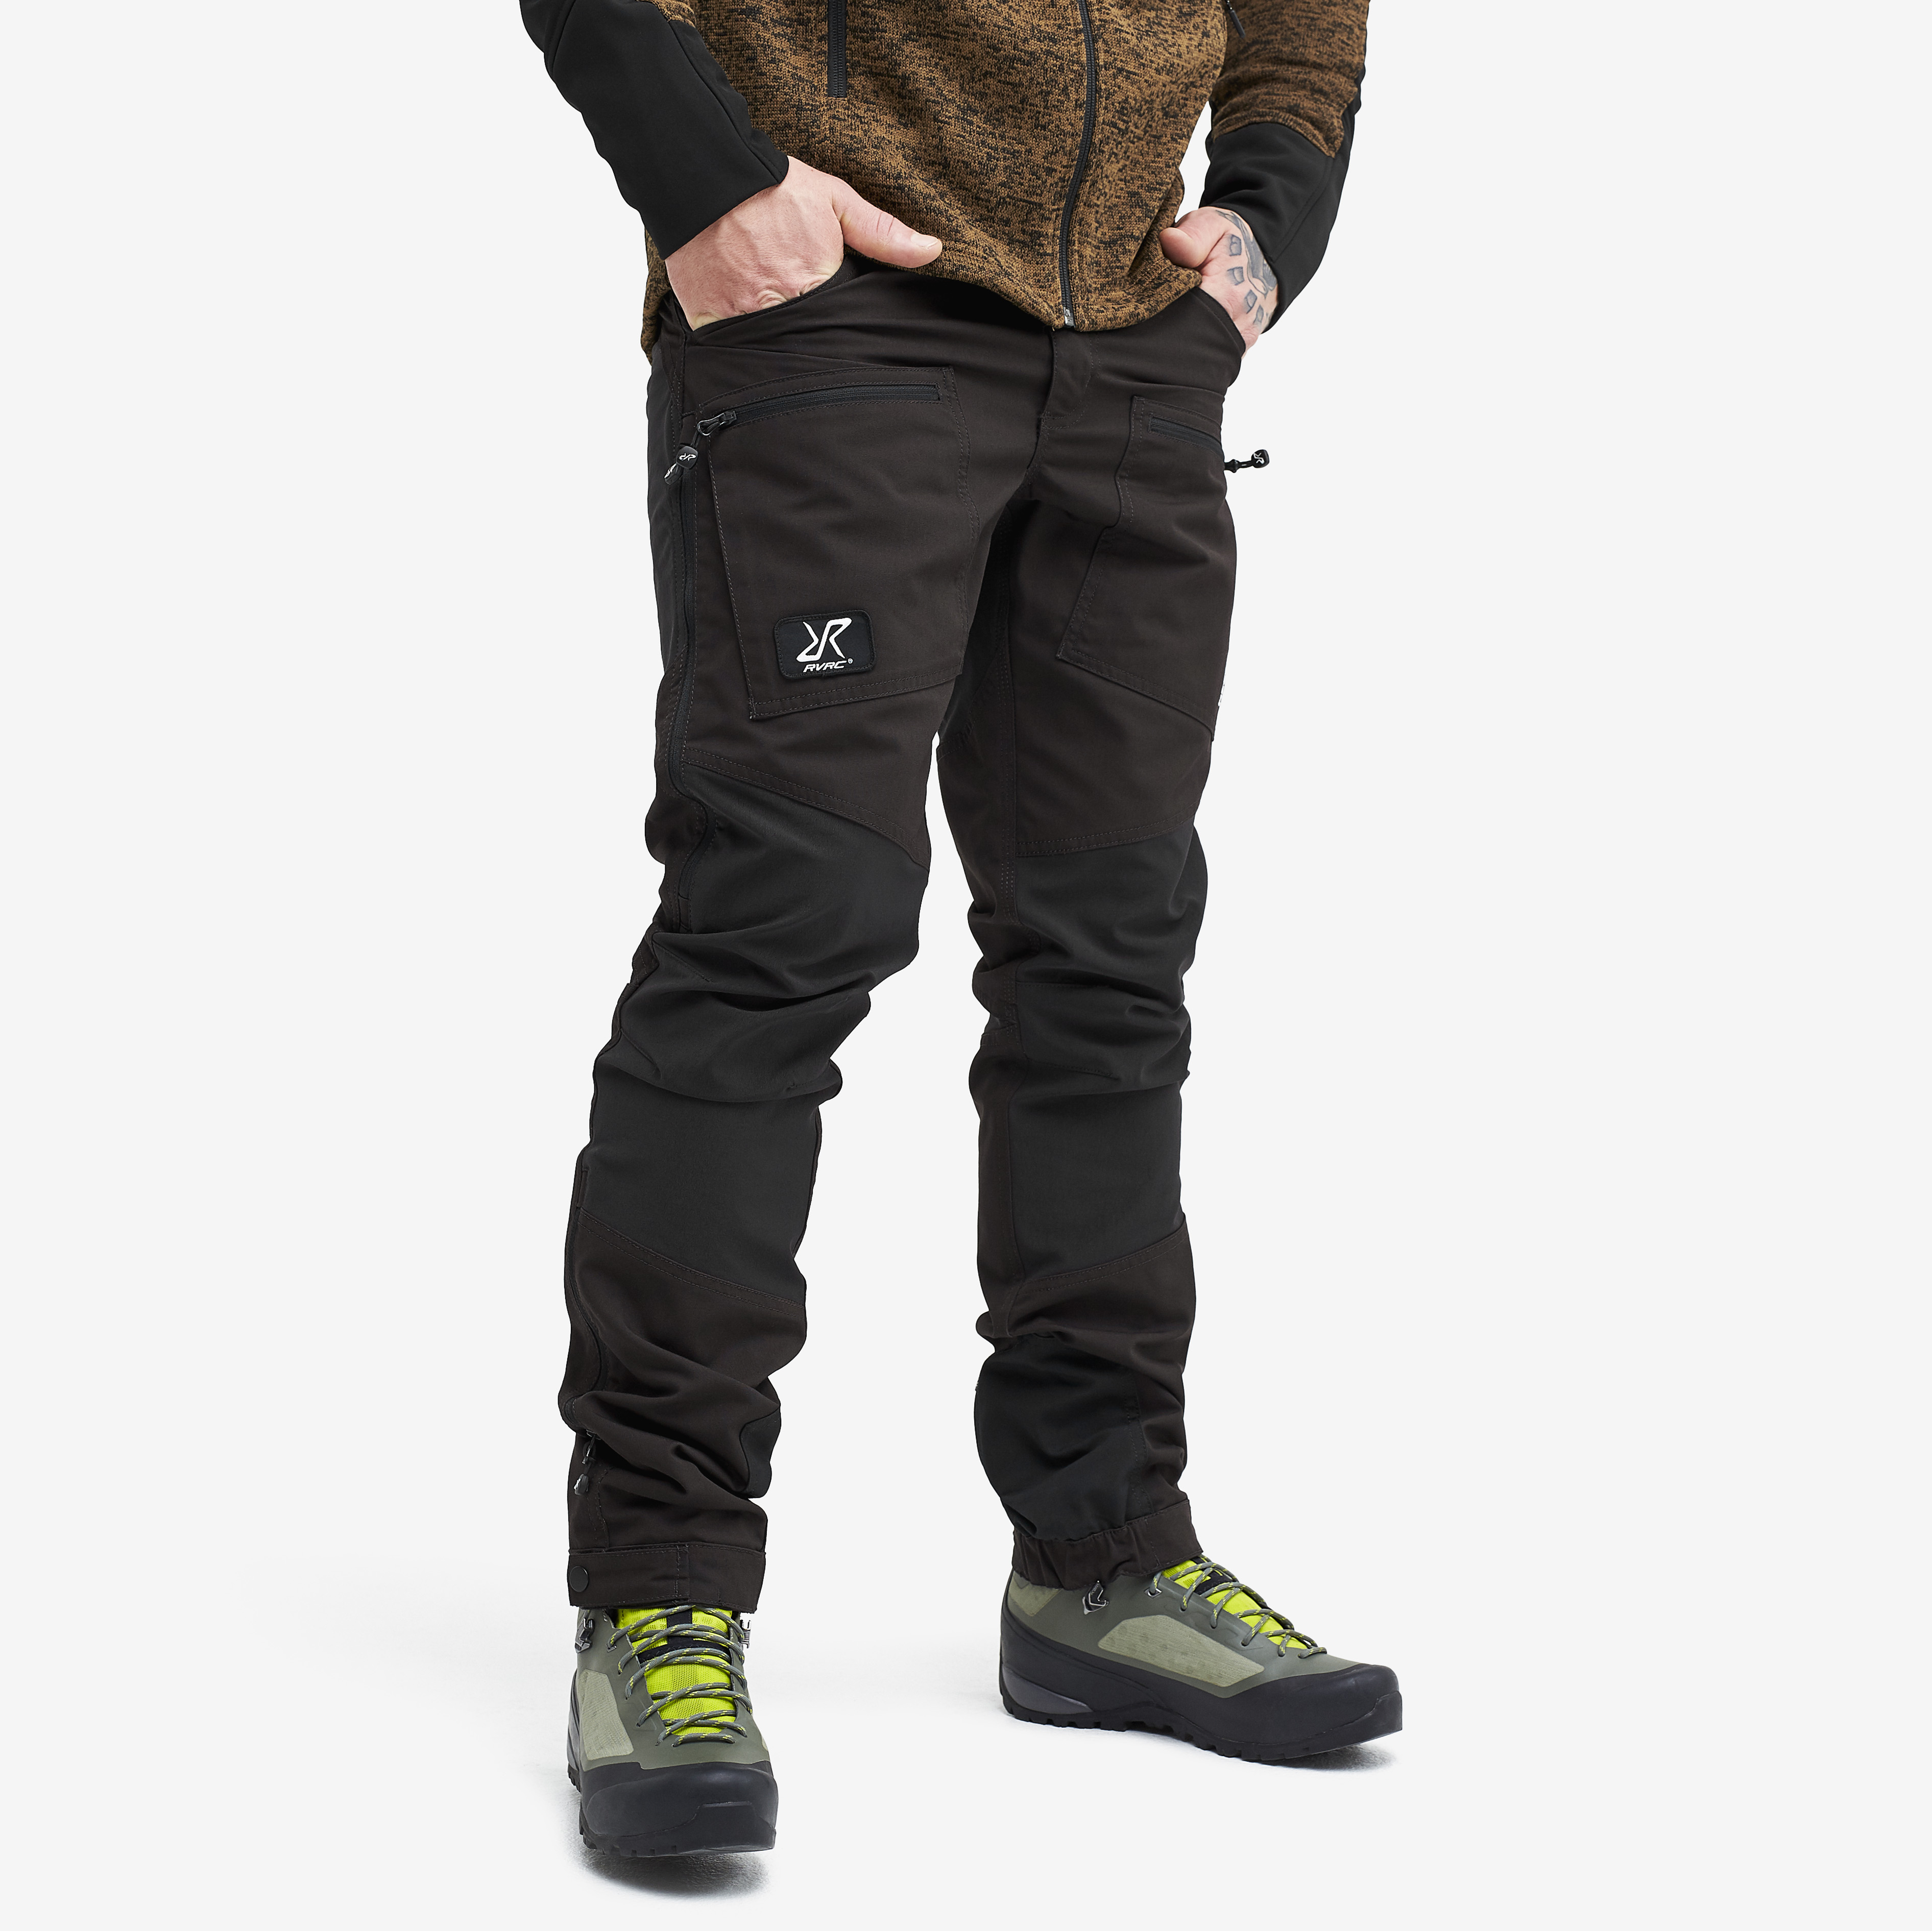 Nordwand Pro Rescue hiking pants for men in black